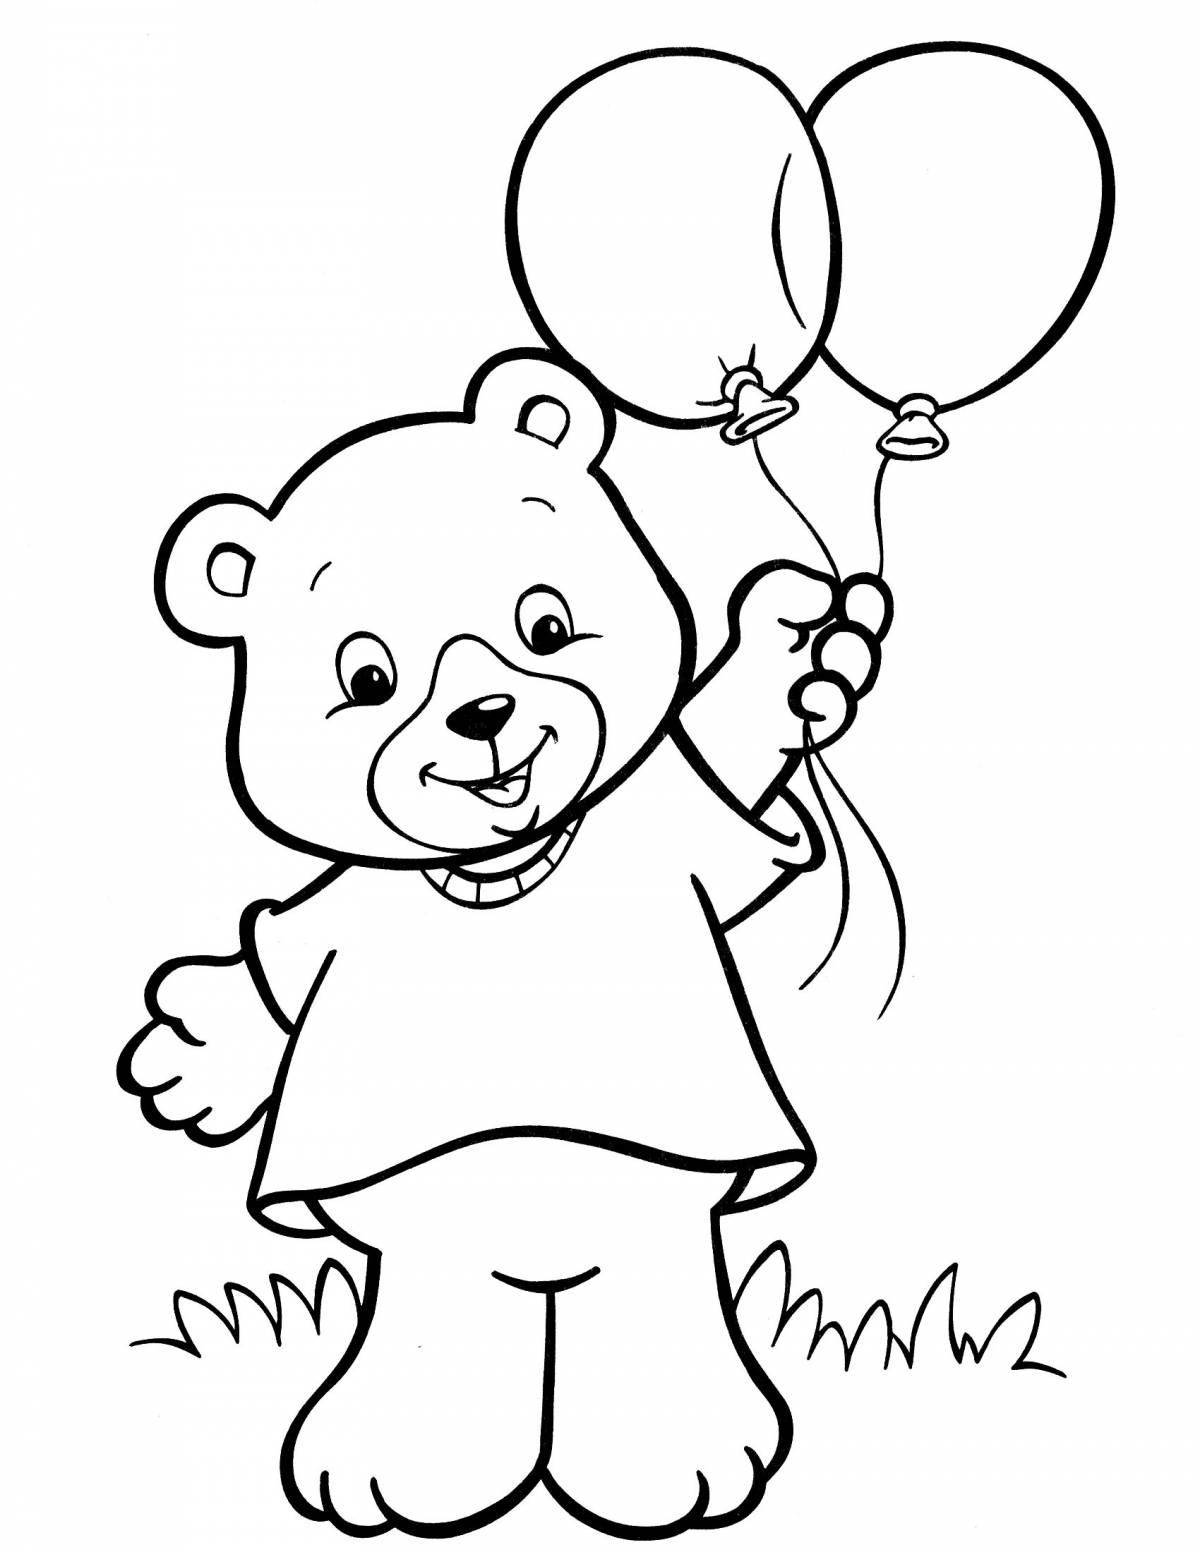 Colorful teddy bear coloring page